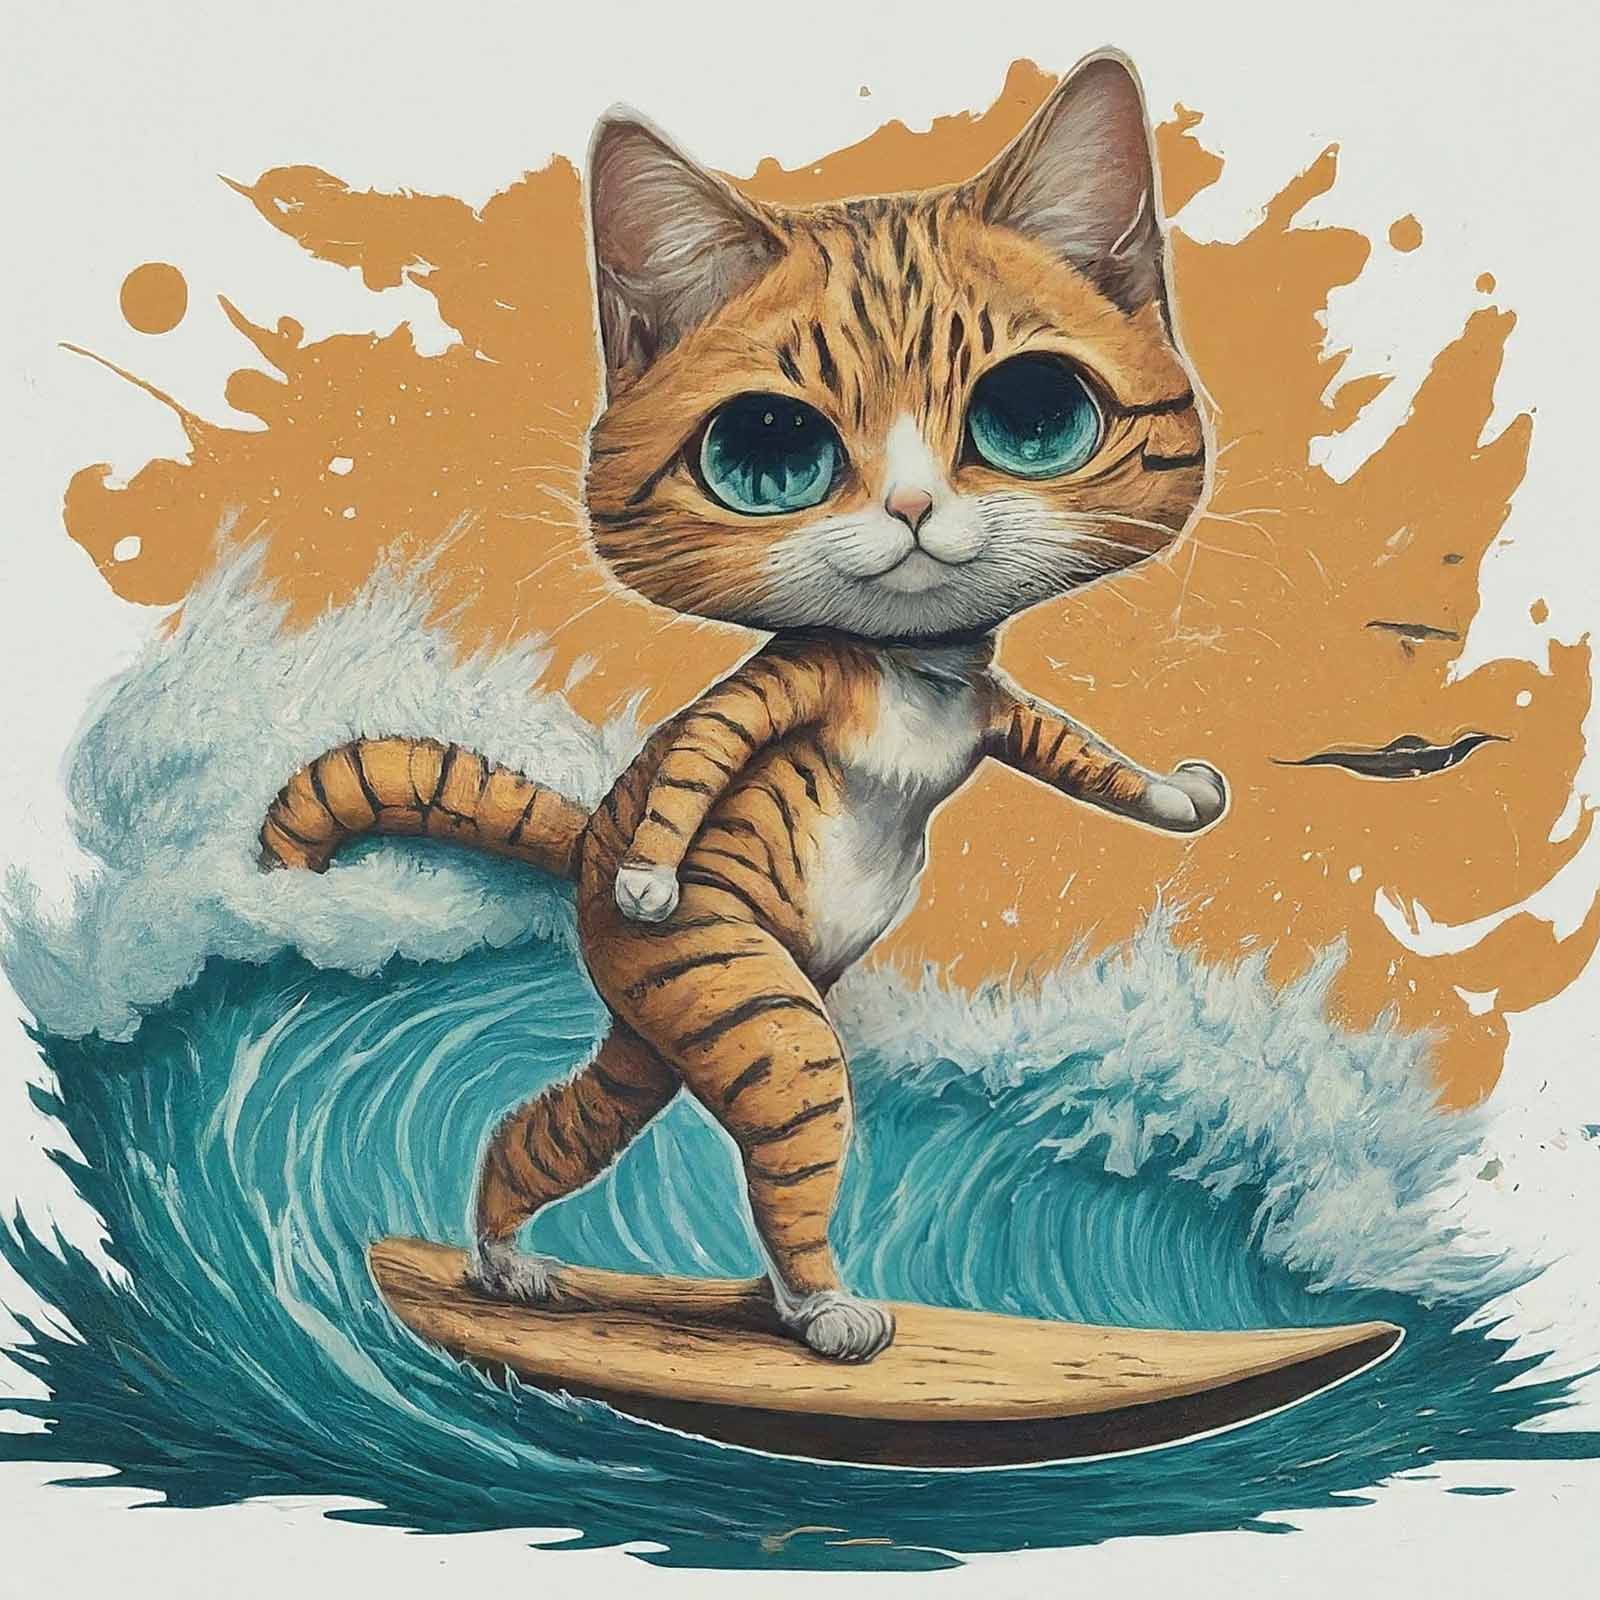 A Cat Surfer Riding A Wave On A Surfboard.